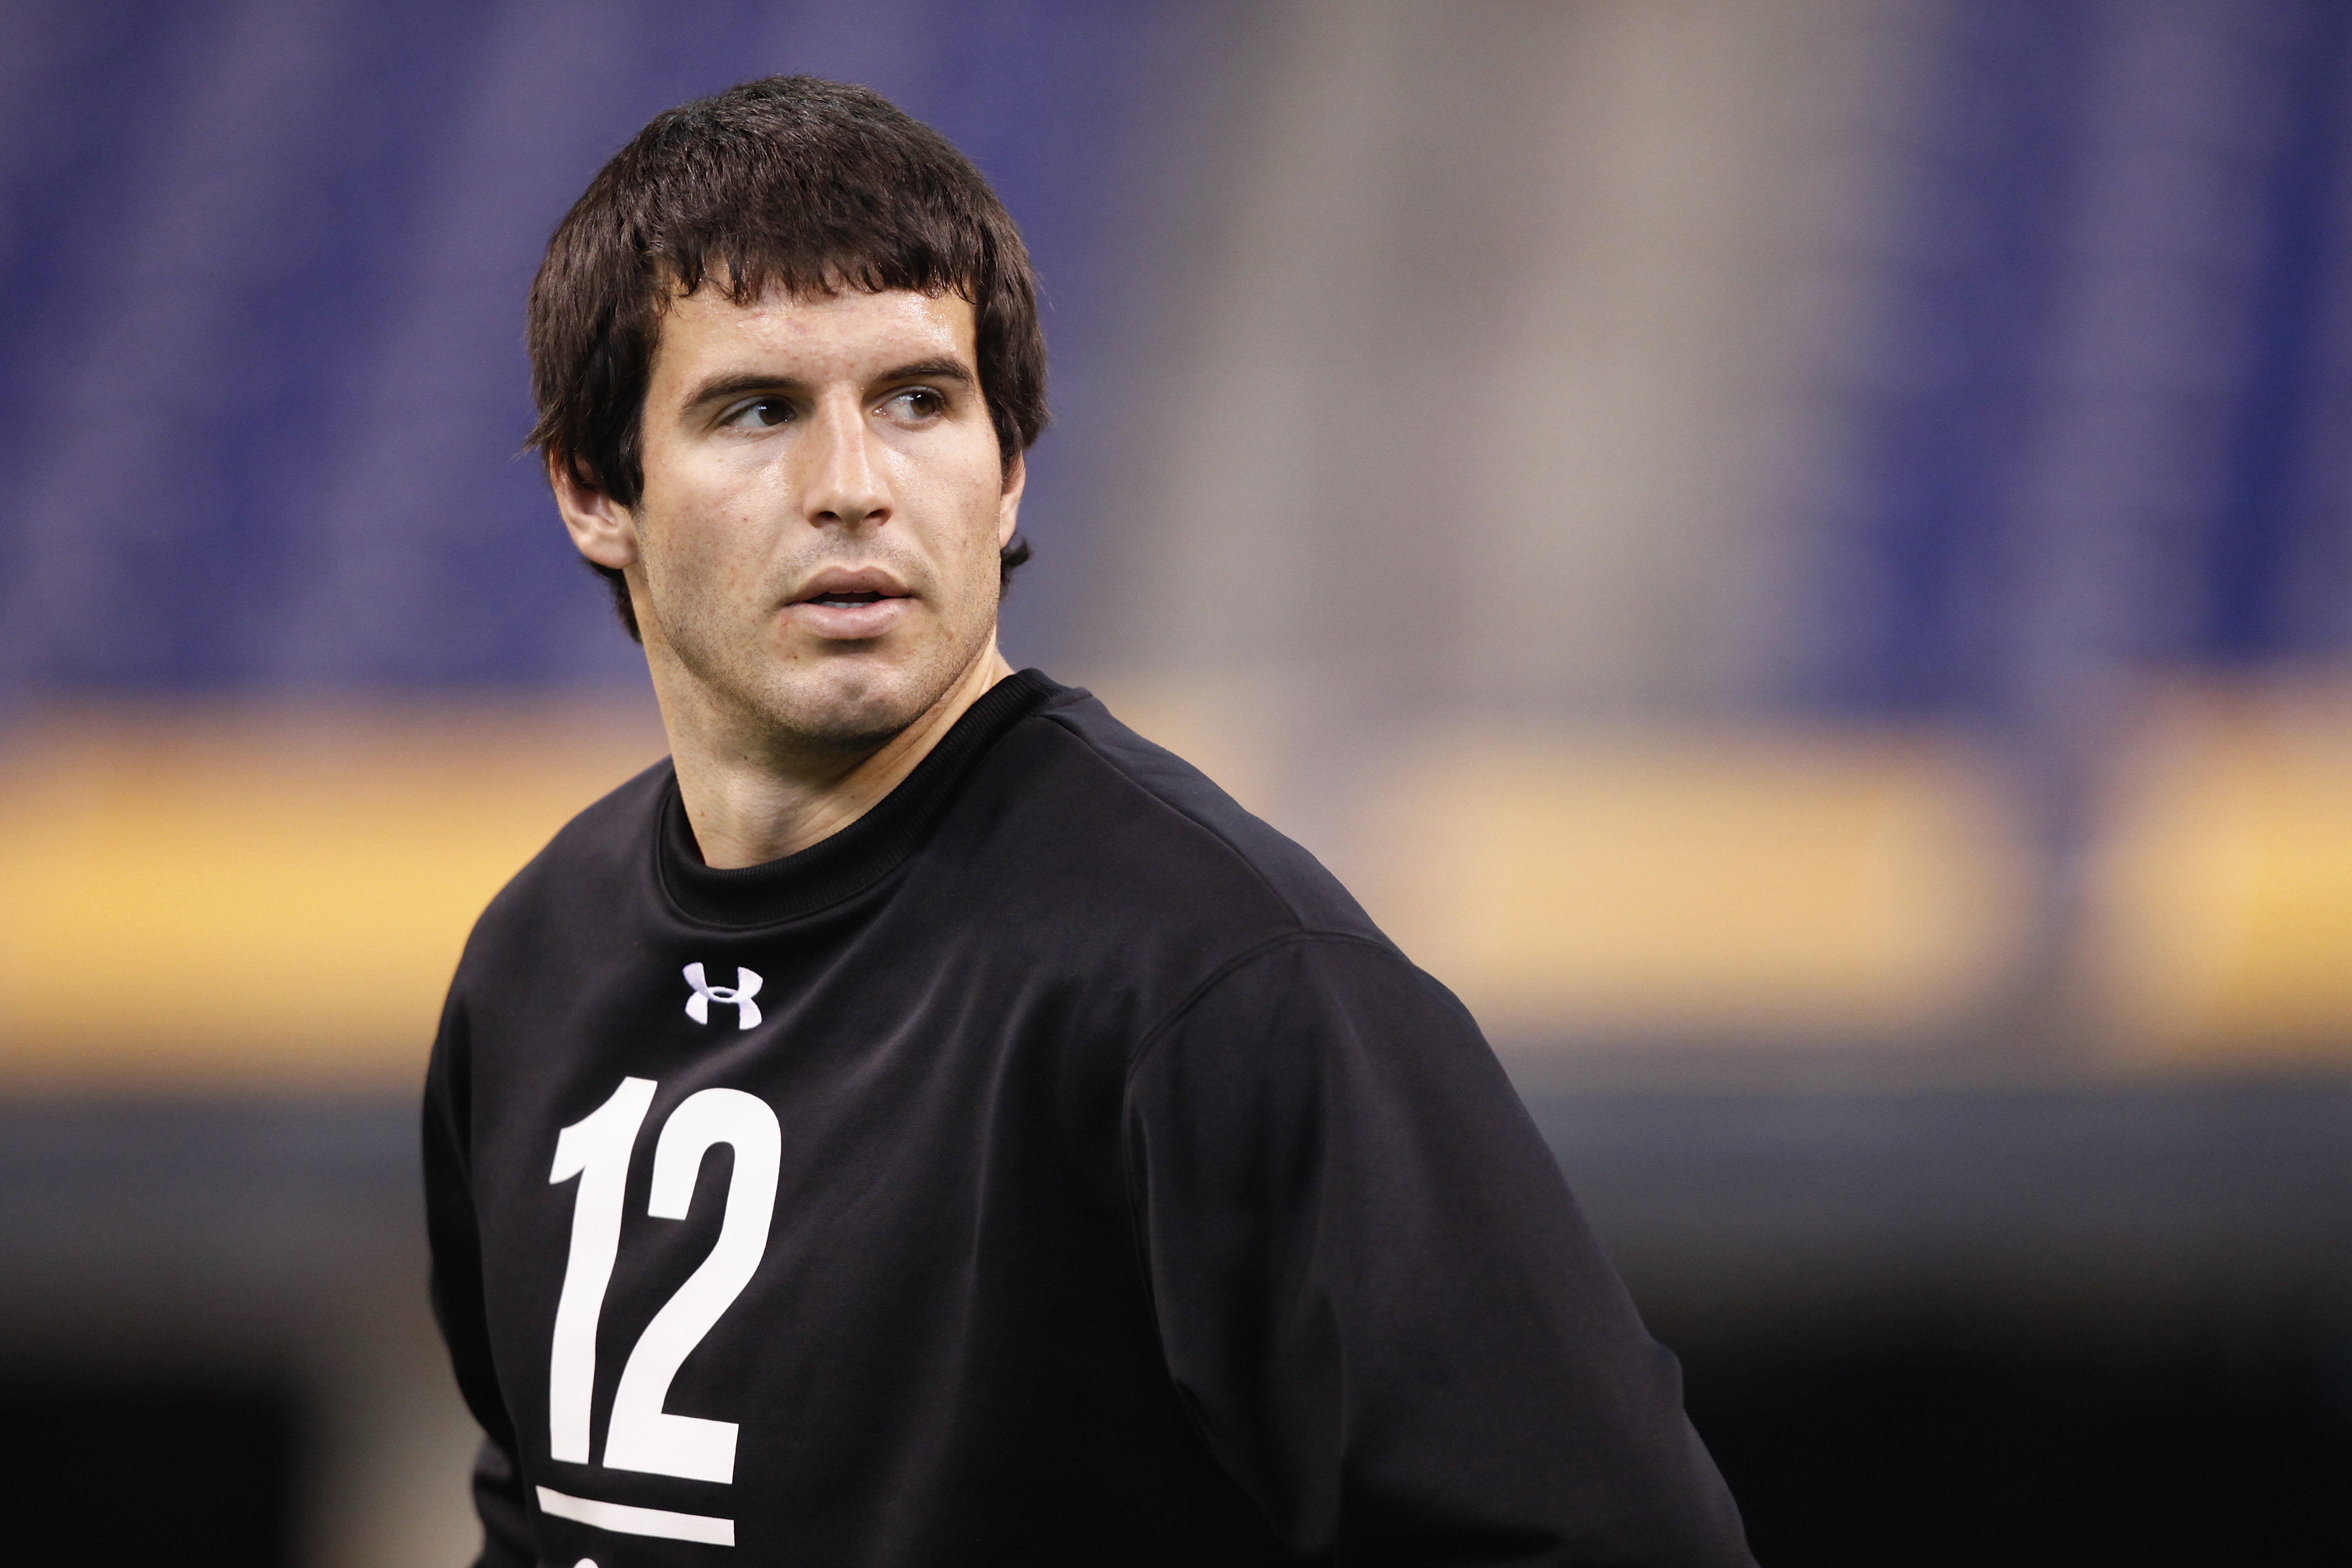 INDIANAPOLIS, IN - FEBRUARY 27: Quarterback Christian Ponder of Florida State looks on during the 2011 NFL Scouting Combine at Lucas Oil Stadium on February 27, 2011 in Indianapolis, Indiana. (Photo by Joe Robbins/Getty Images)